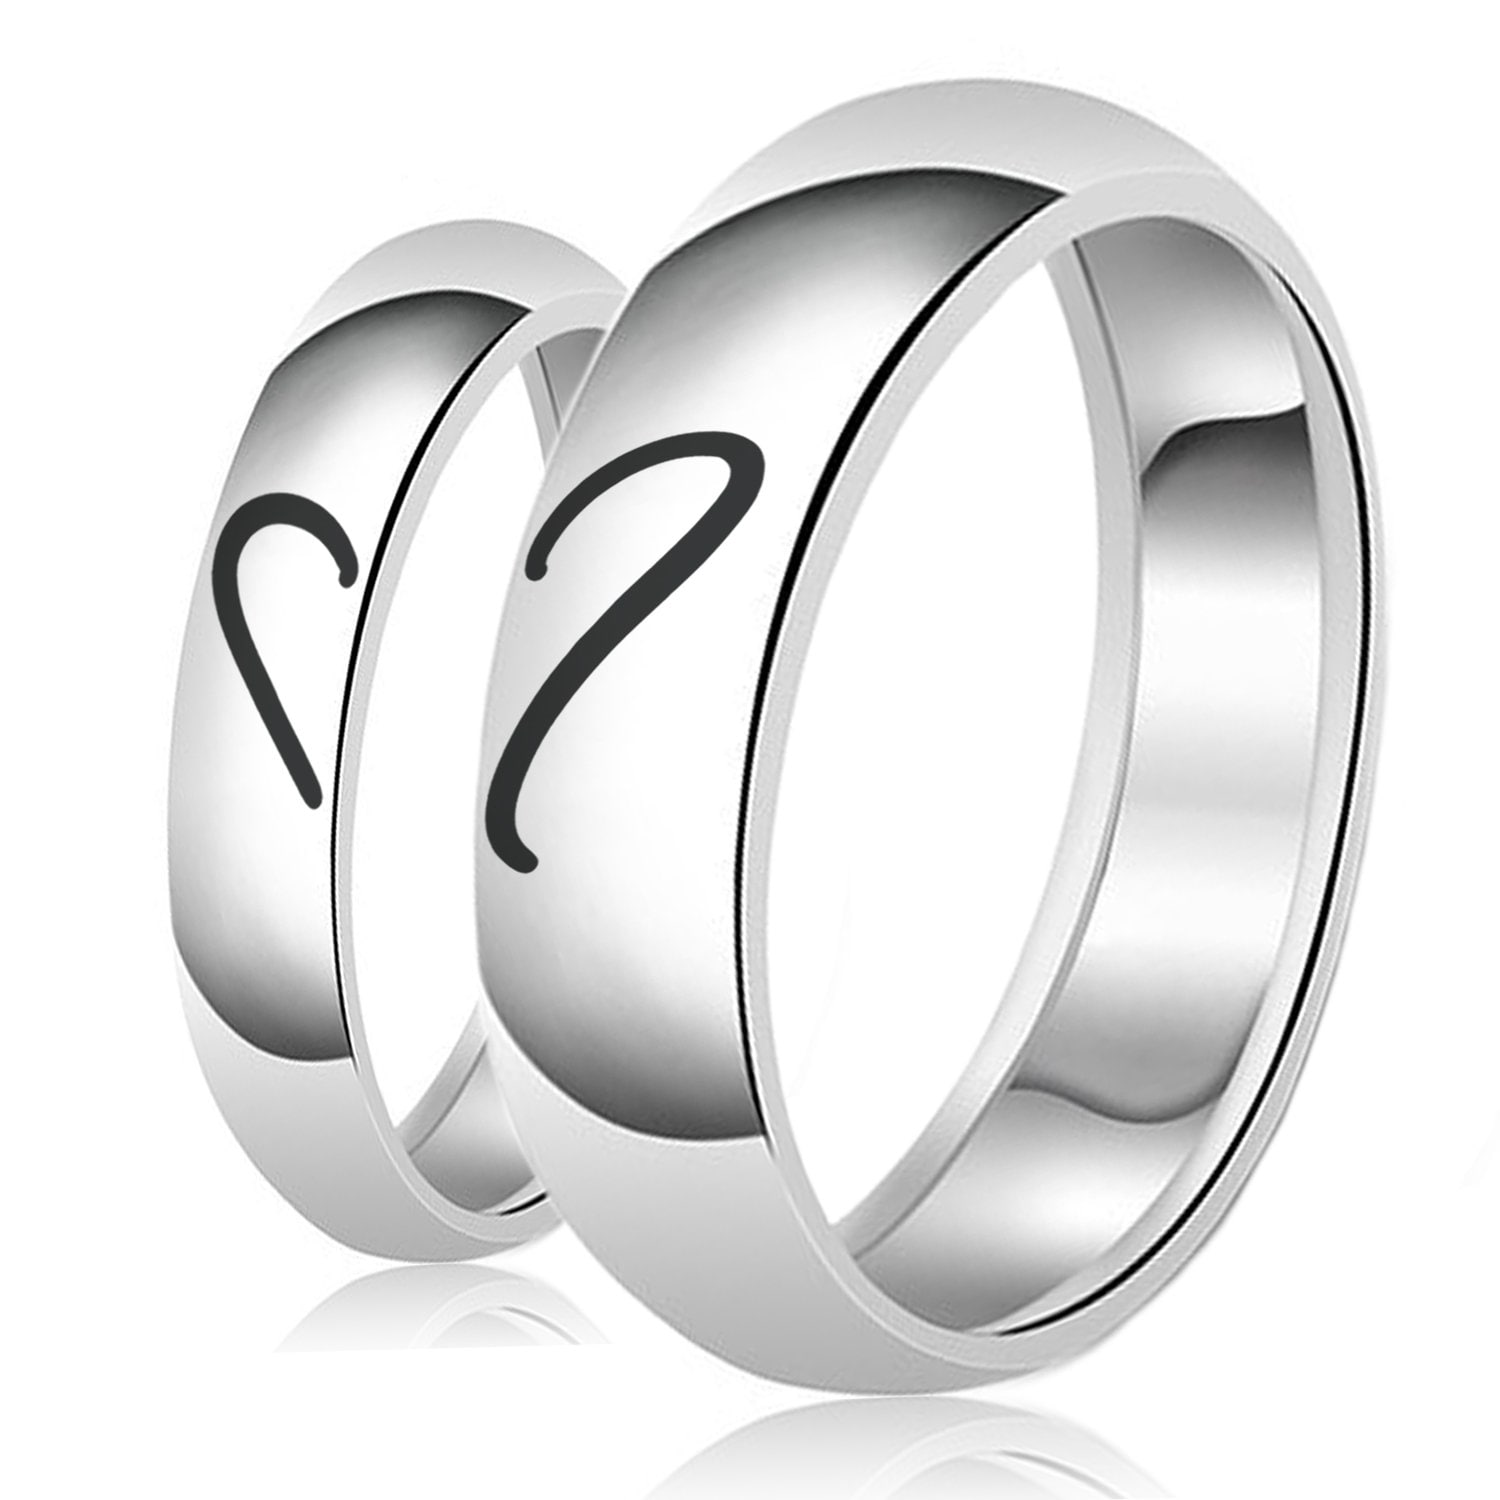 Buy Wild Heart Wedding Bands Set, His and Her Half Heart Rings, Rock  Wedding Rings, Heavy His and Her Wedding Ring, Unique Sterling Silver Bands  Online in India - Etsy